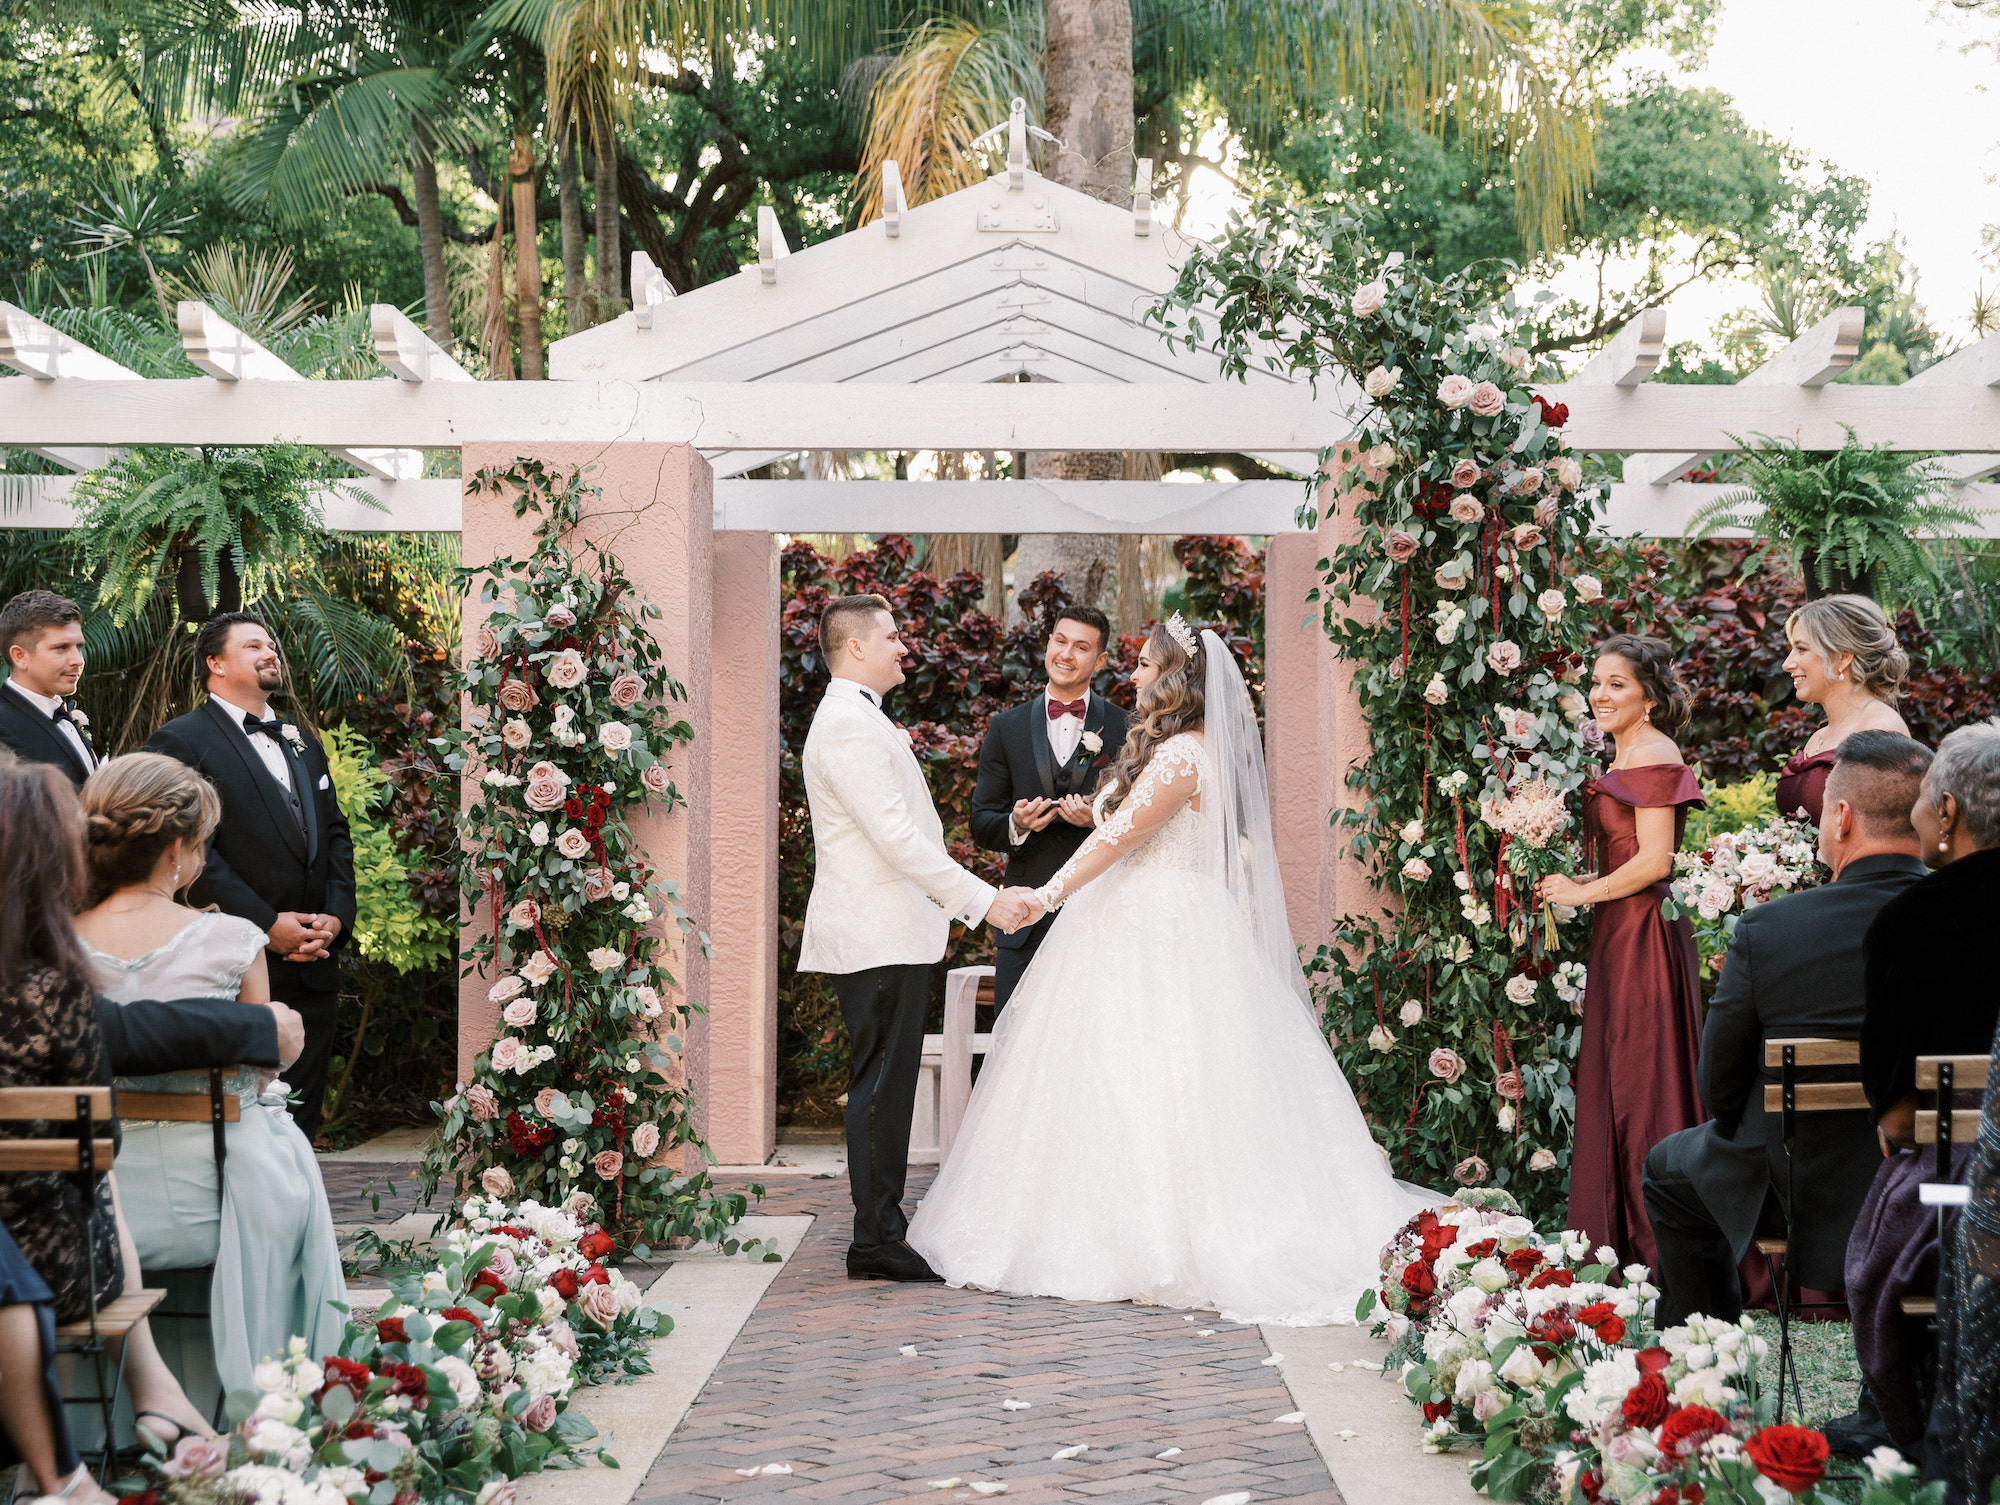 Elegant Royal Glam Gatsby Bride and Groom Exchanging Wedding Vows During Outdoor Courtyard Wedding Ceremony, Lush Greenery, Mauve, Blush Pink, Red and White Roses with Hanging Amaranthus Floral Pillars | Tampa Bay Wedding Planner and Designer John Campbell Weddings | St. Pete Wedding Venue The Vinoy Renaissance